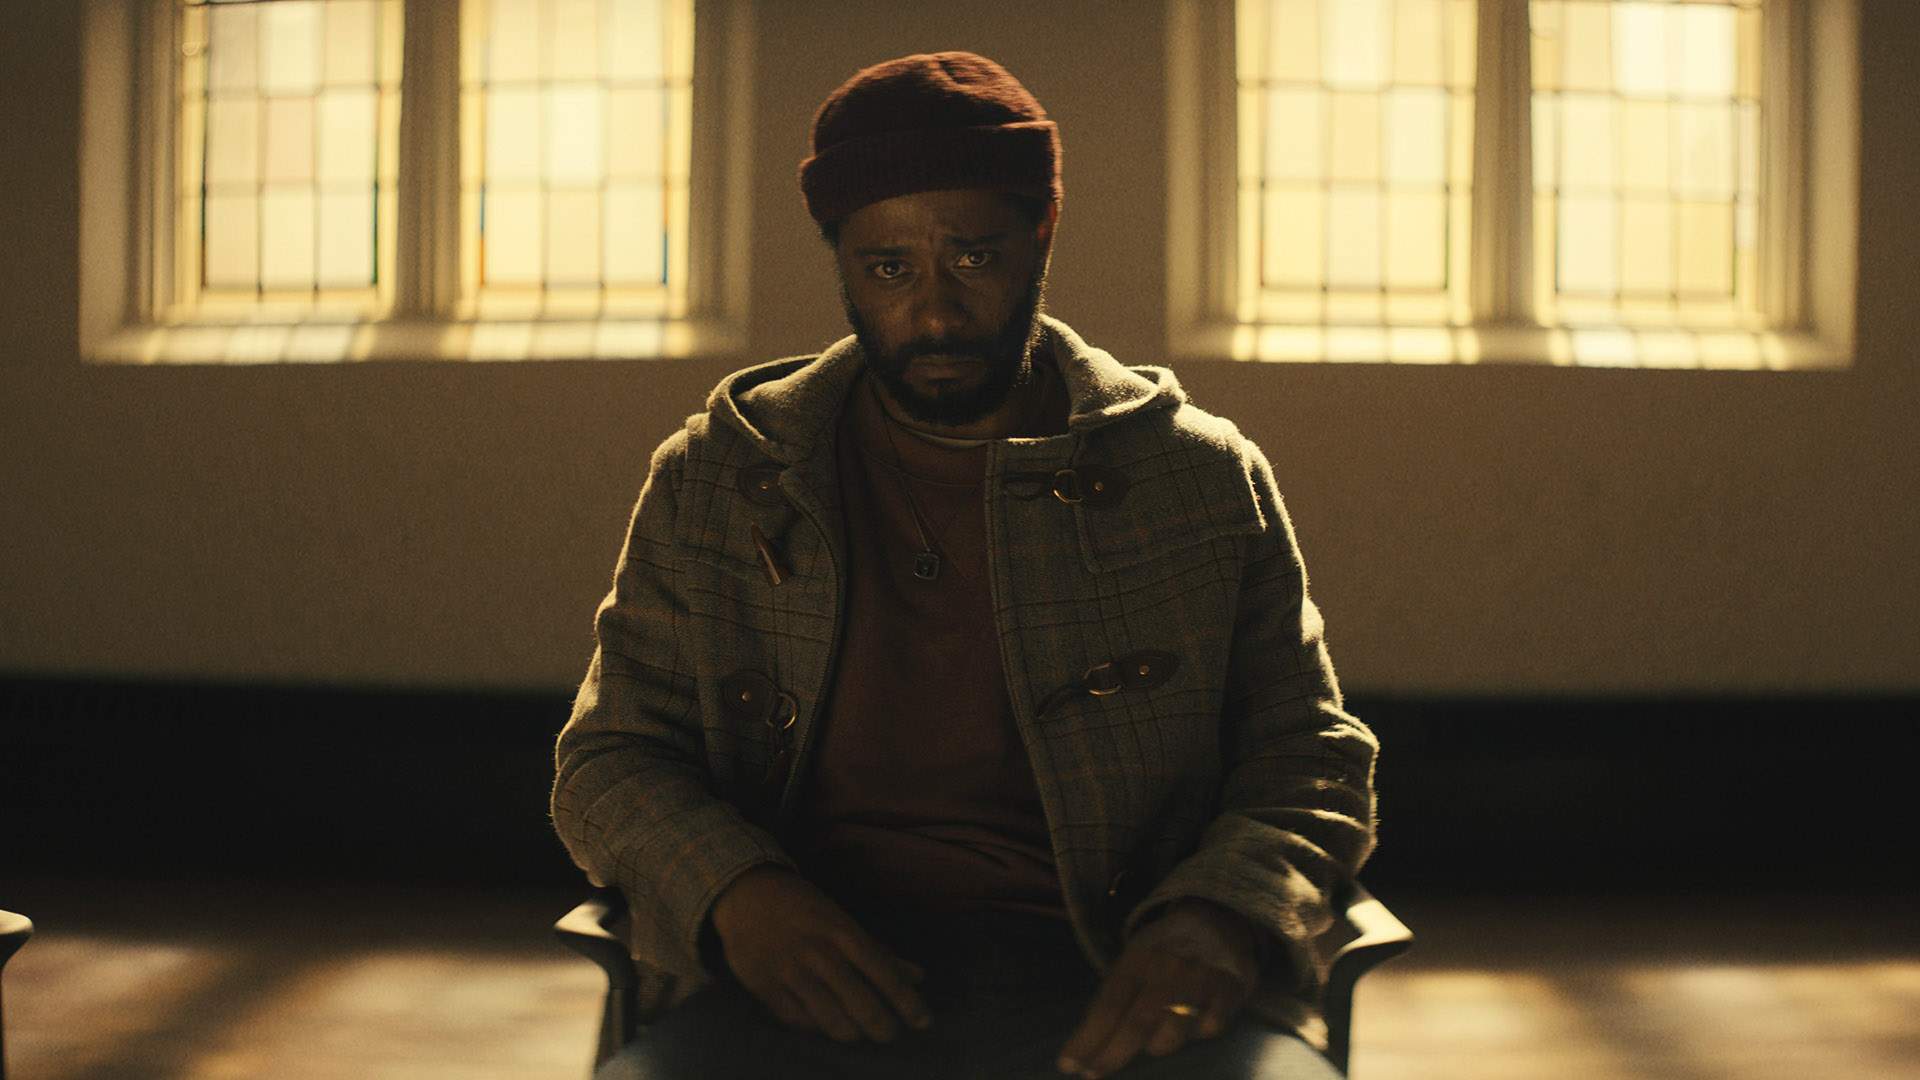 New Horror-Fantasy Gem 'The Changeling' Is Eerie, Entrancing and Led by an Exceptional LaKeith Stanfield